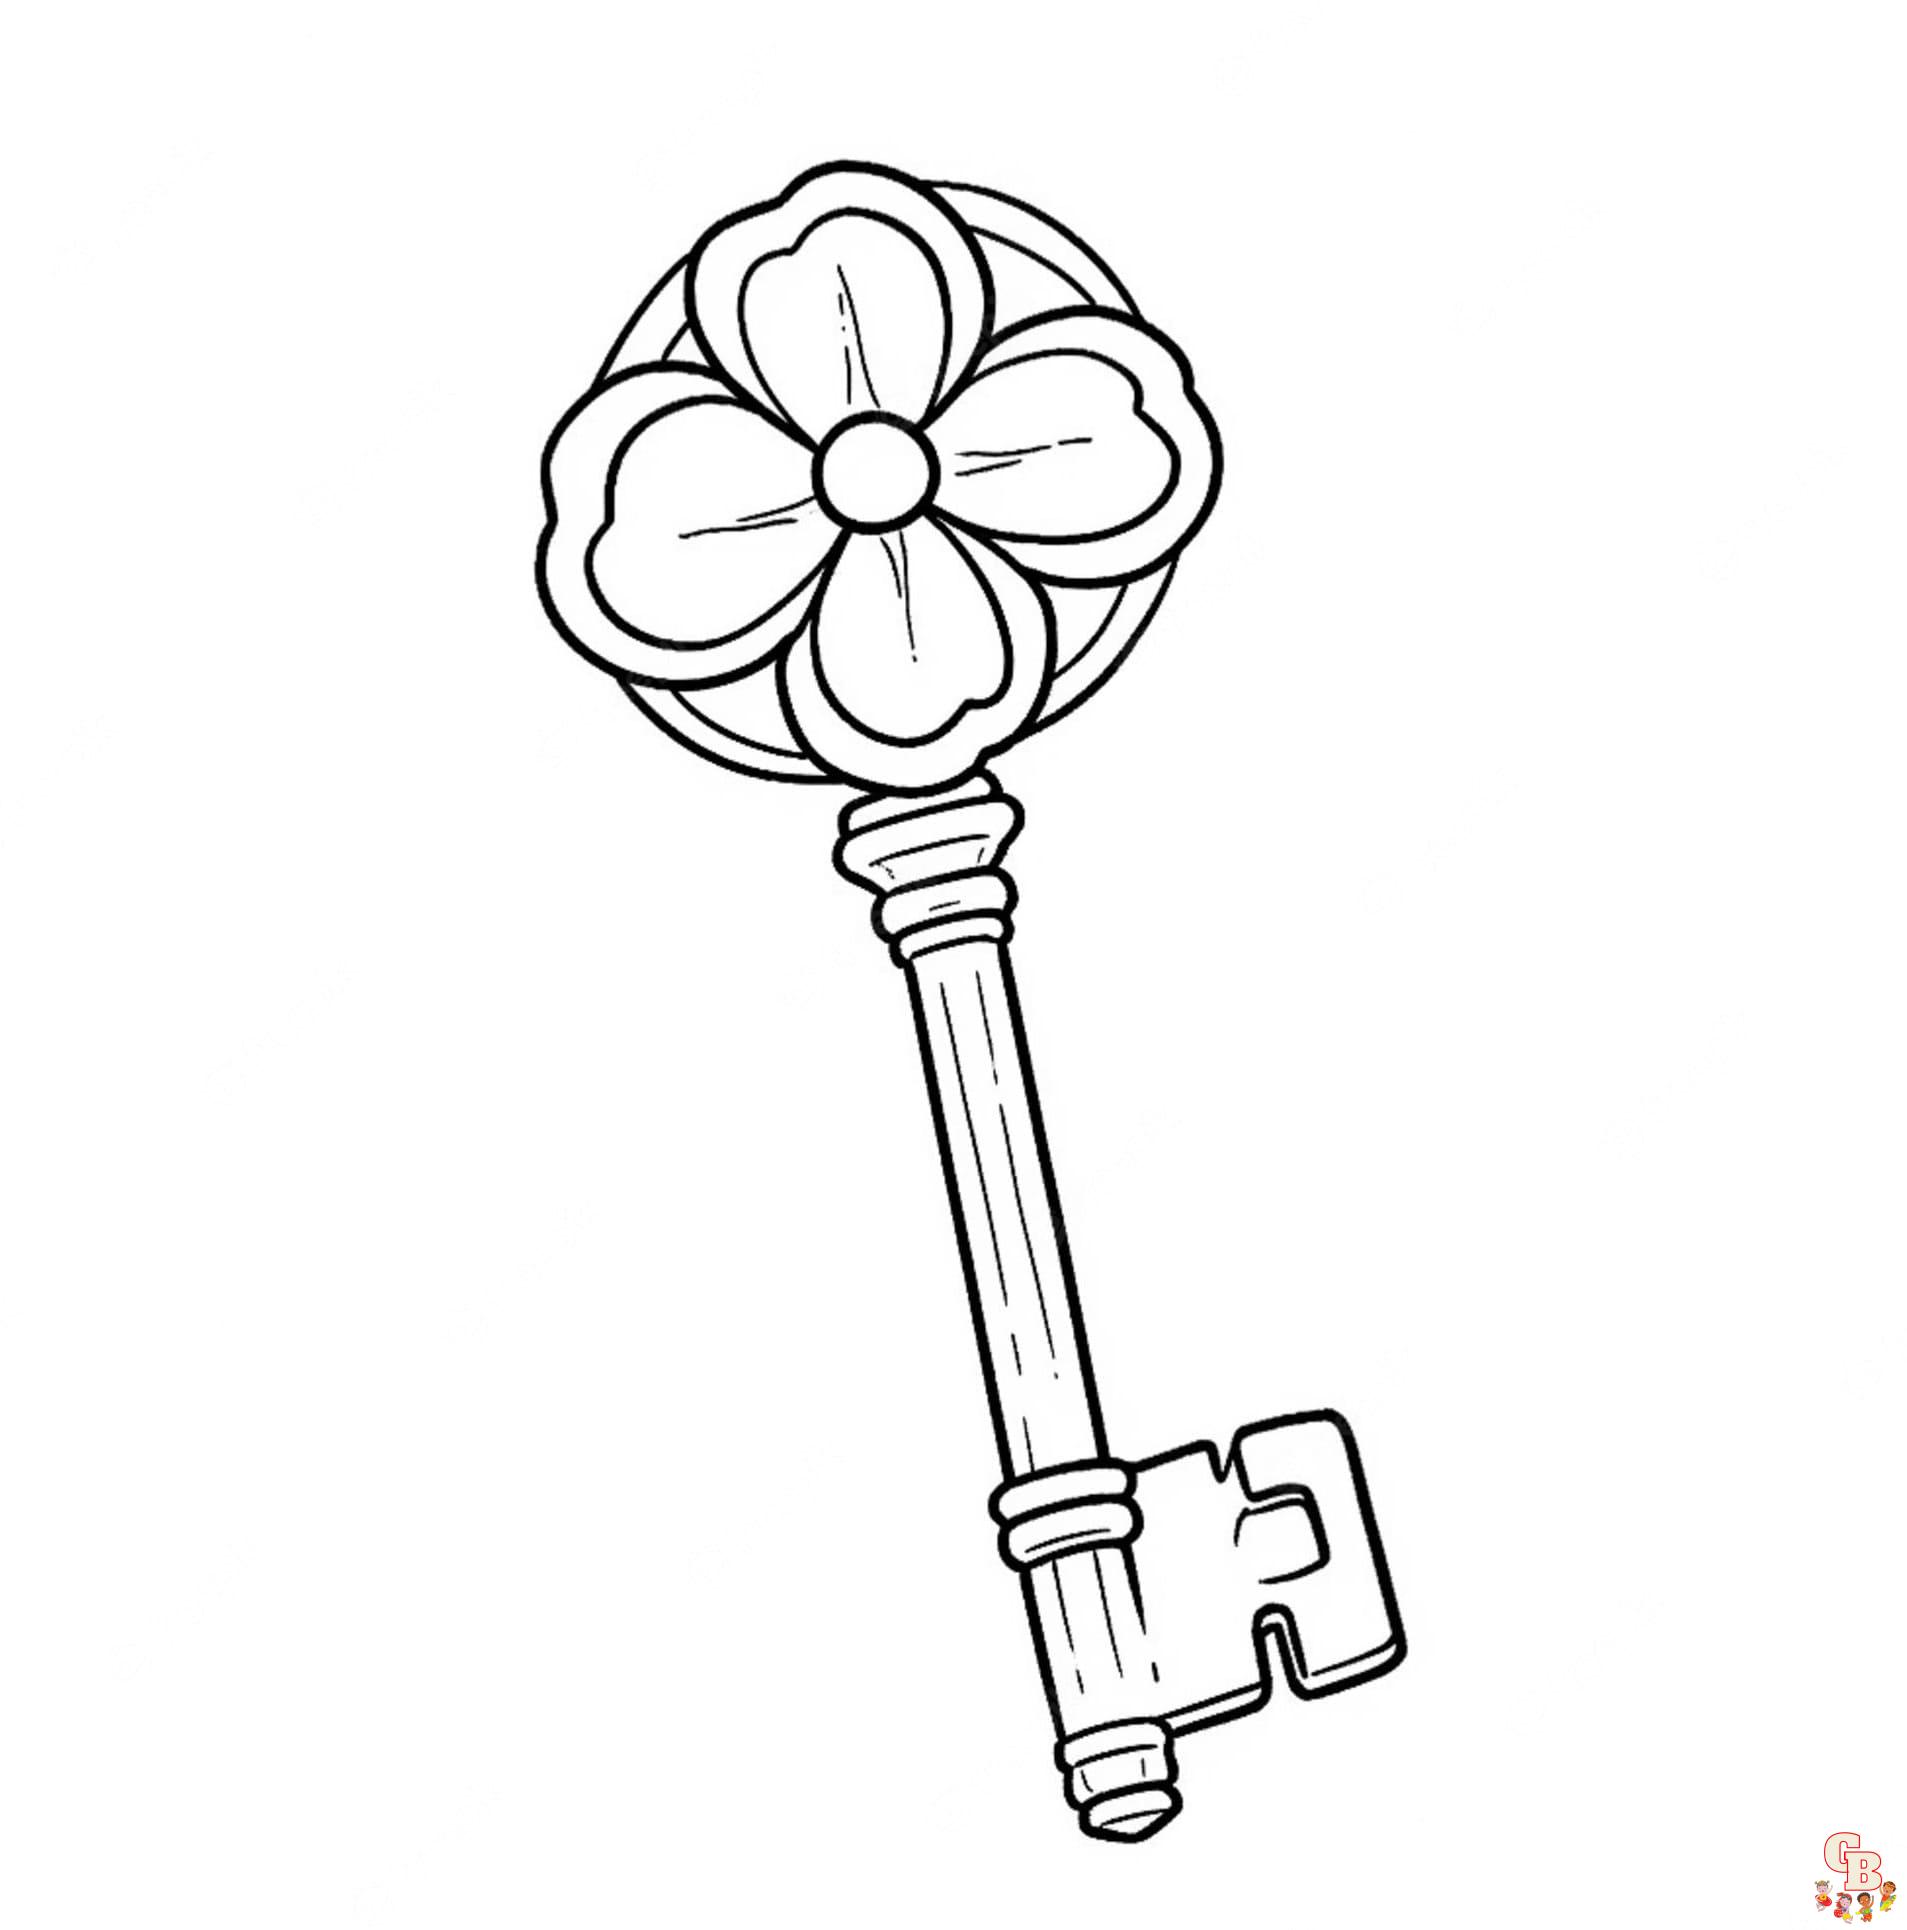 Printable key coloring pages free for kids and adults